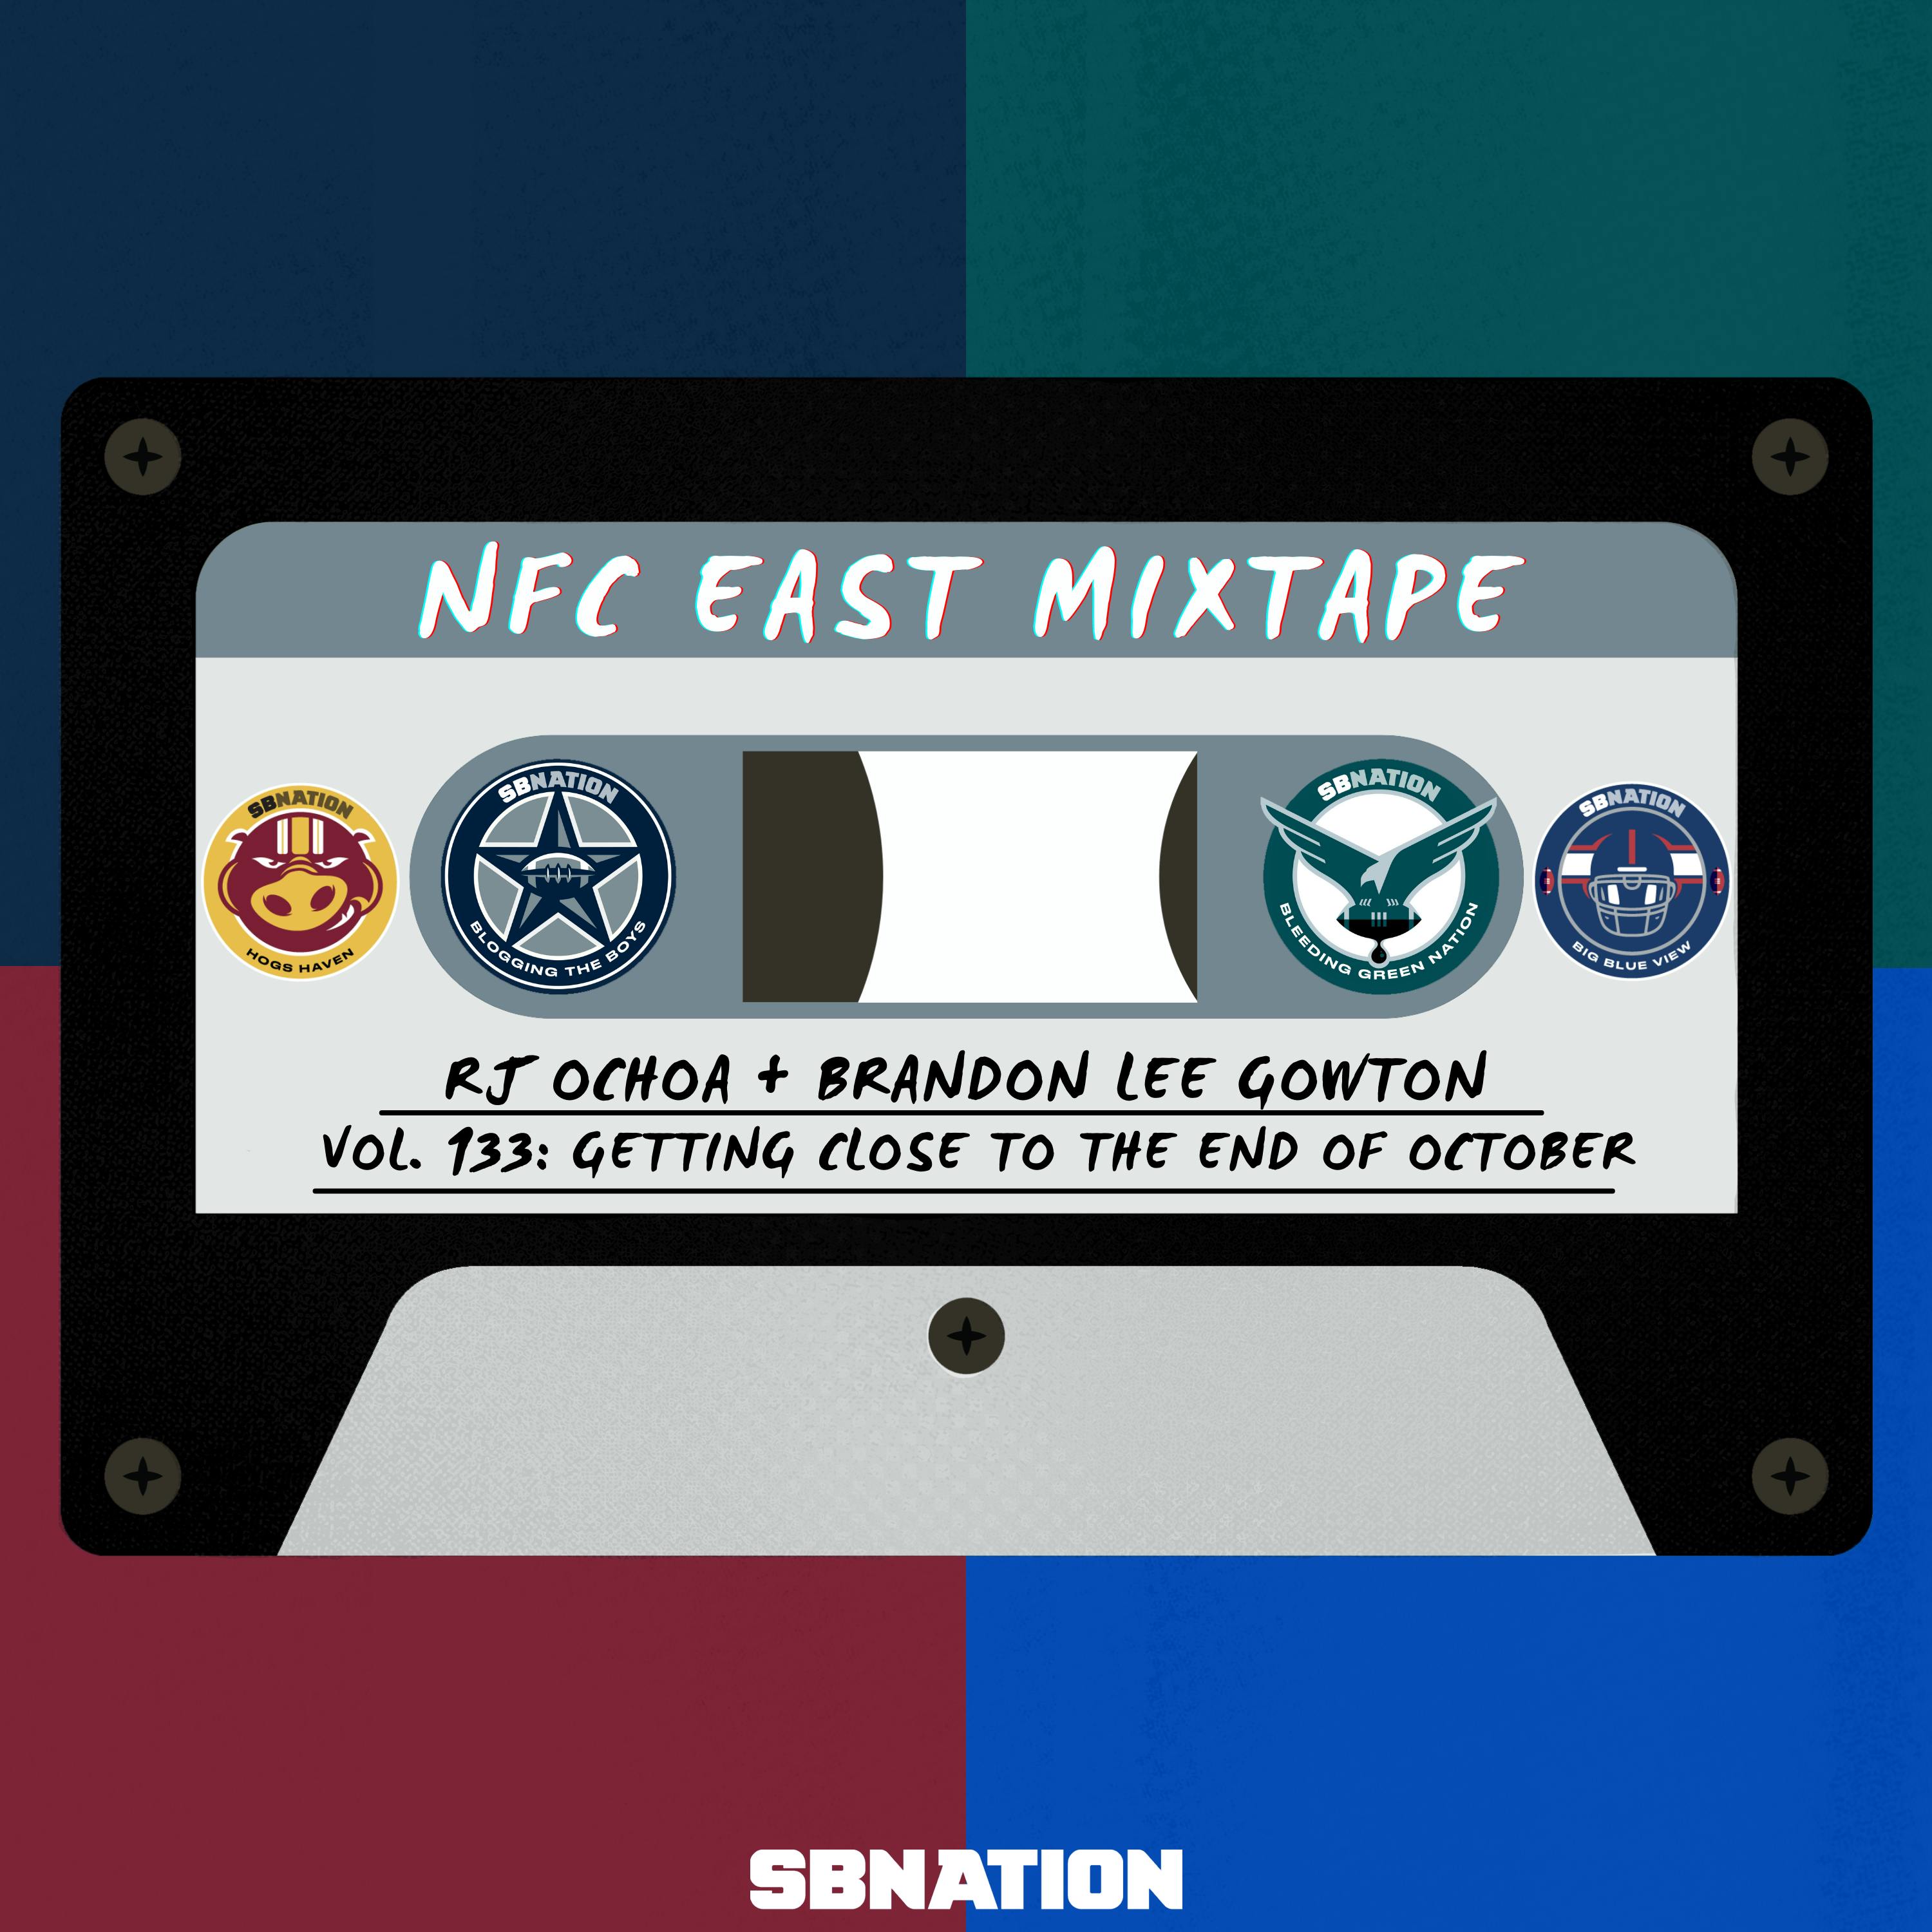 NFC East Mixtape Vol. 133: Getting close to the end of October